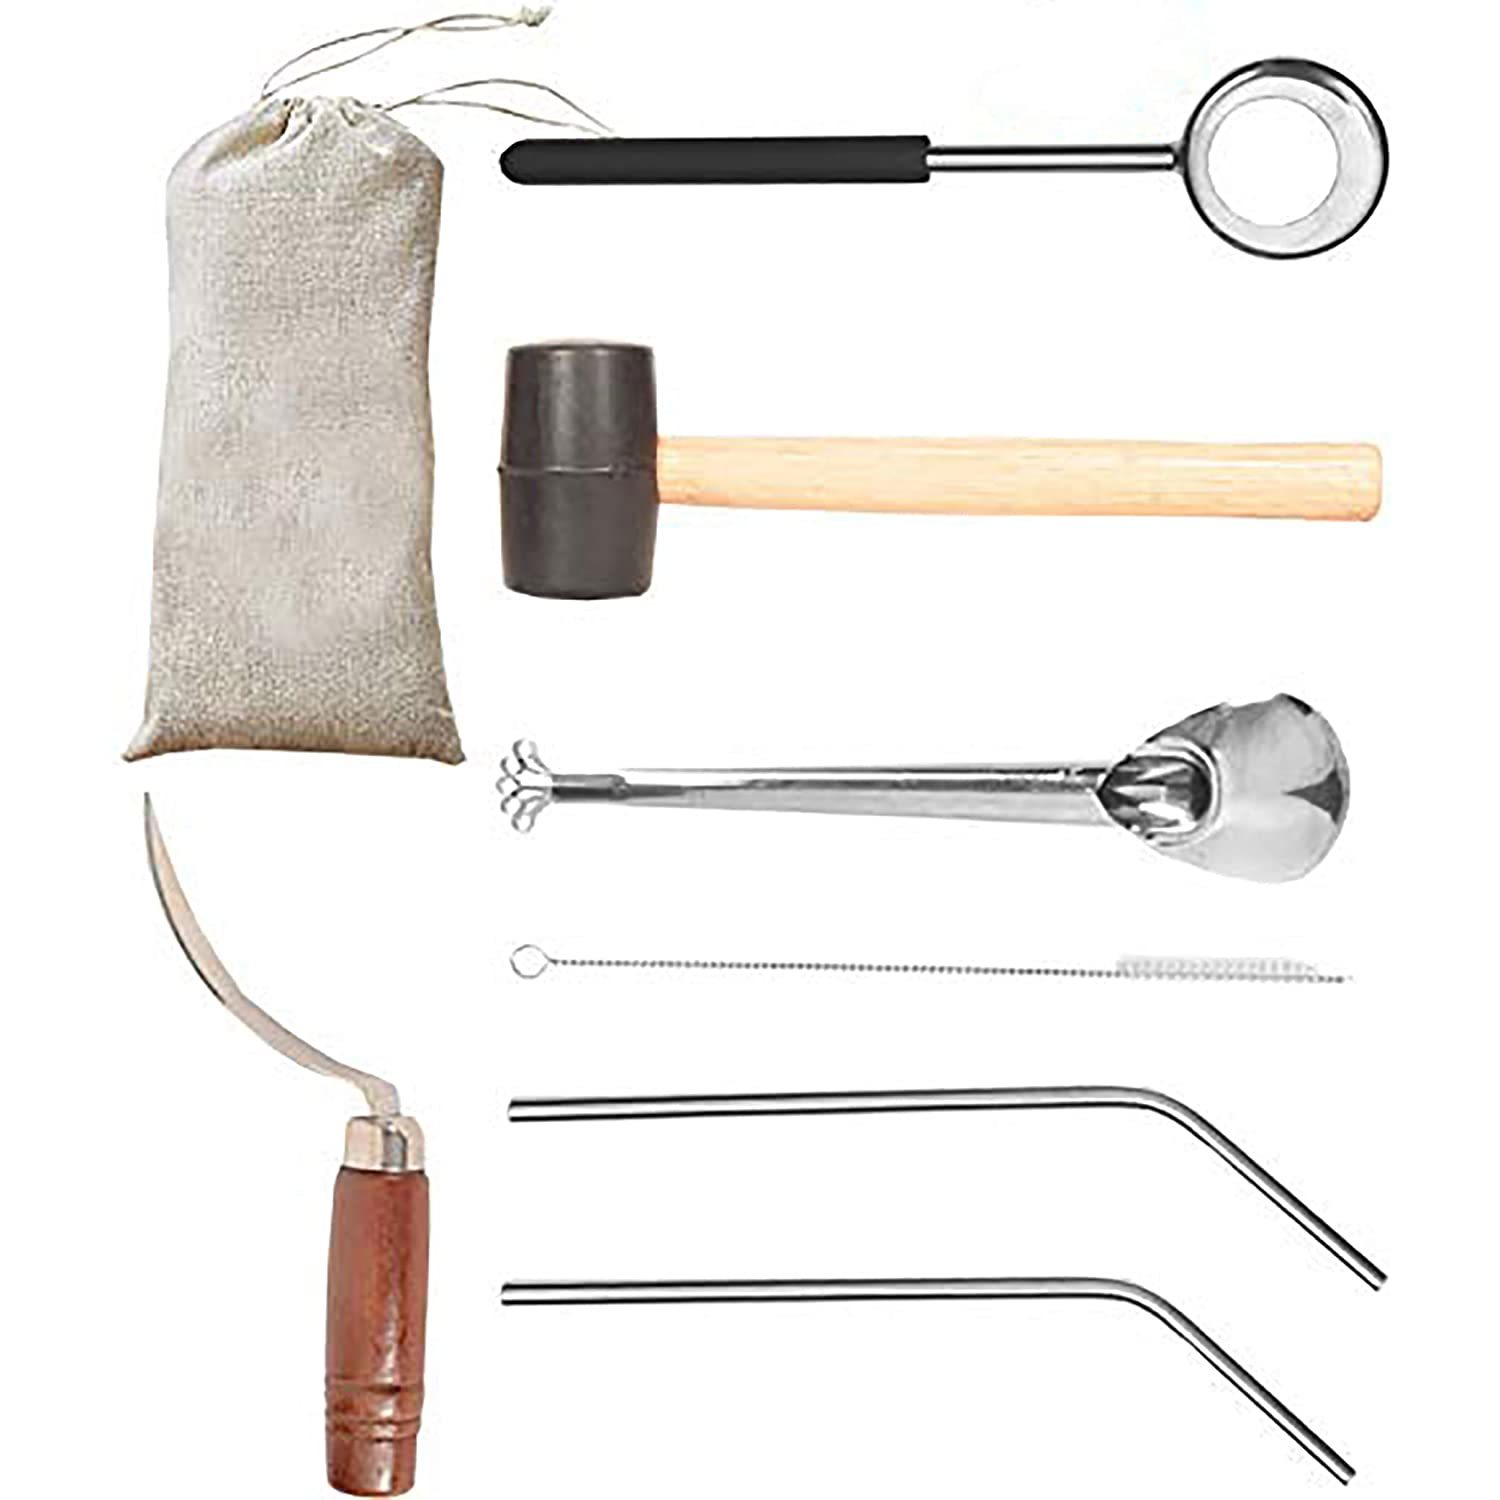 Coconut Opener| Christmas Gifts | Coconut Opener Kit With Hammer Stainless Steel